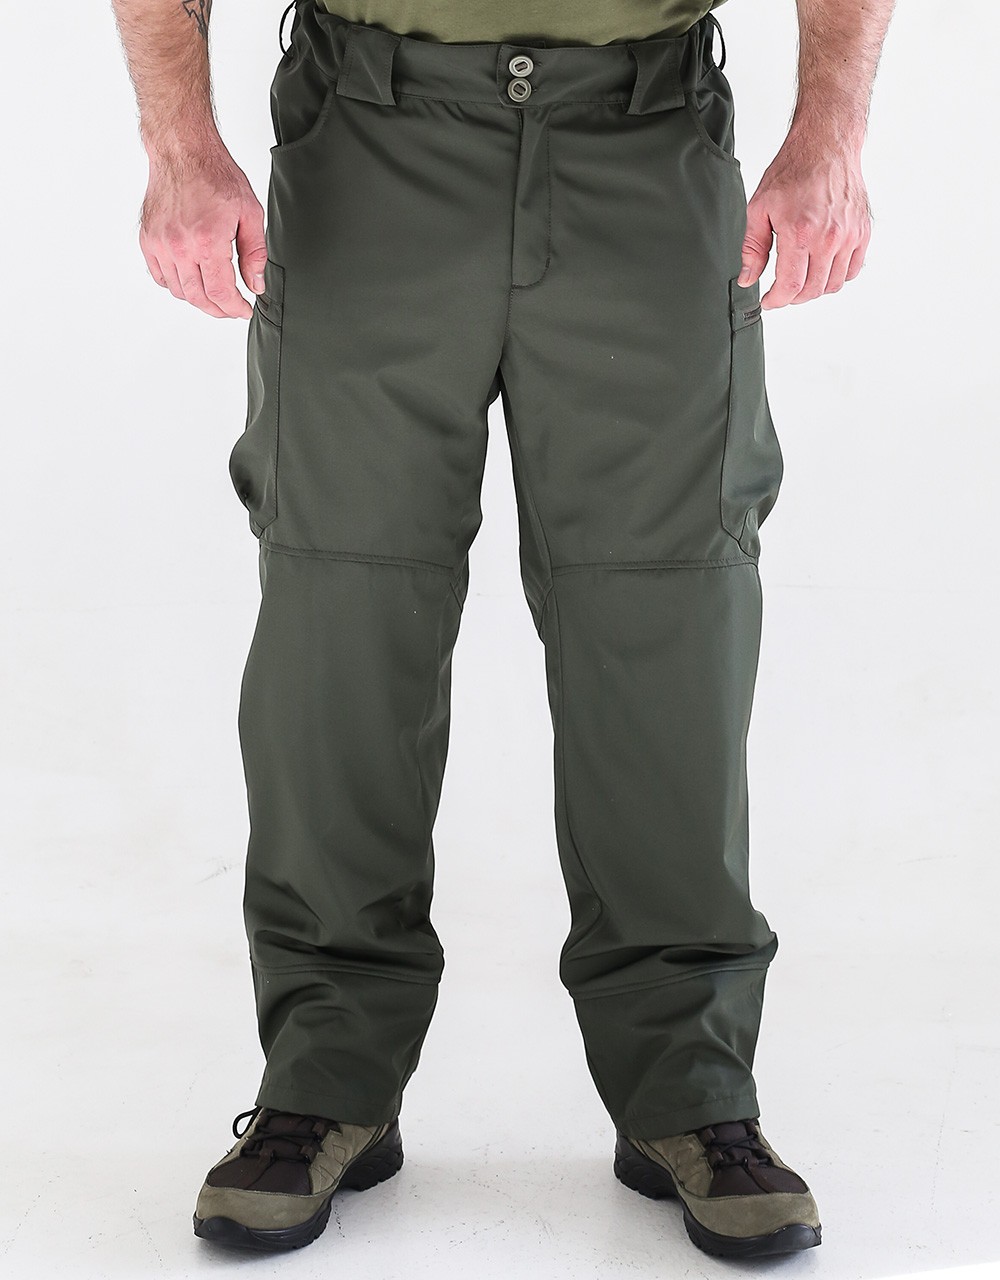 Winter tactical pants miligus - 43804 from MILIGUS with donate to u24